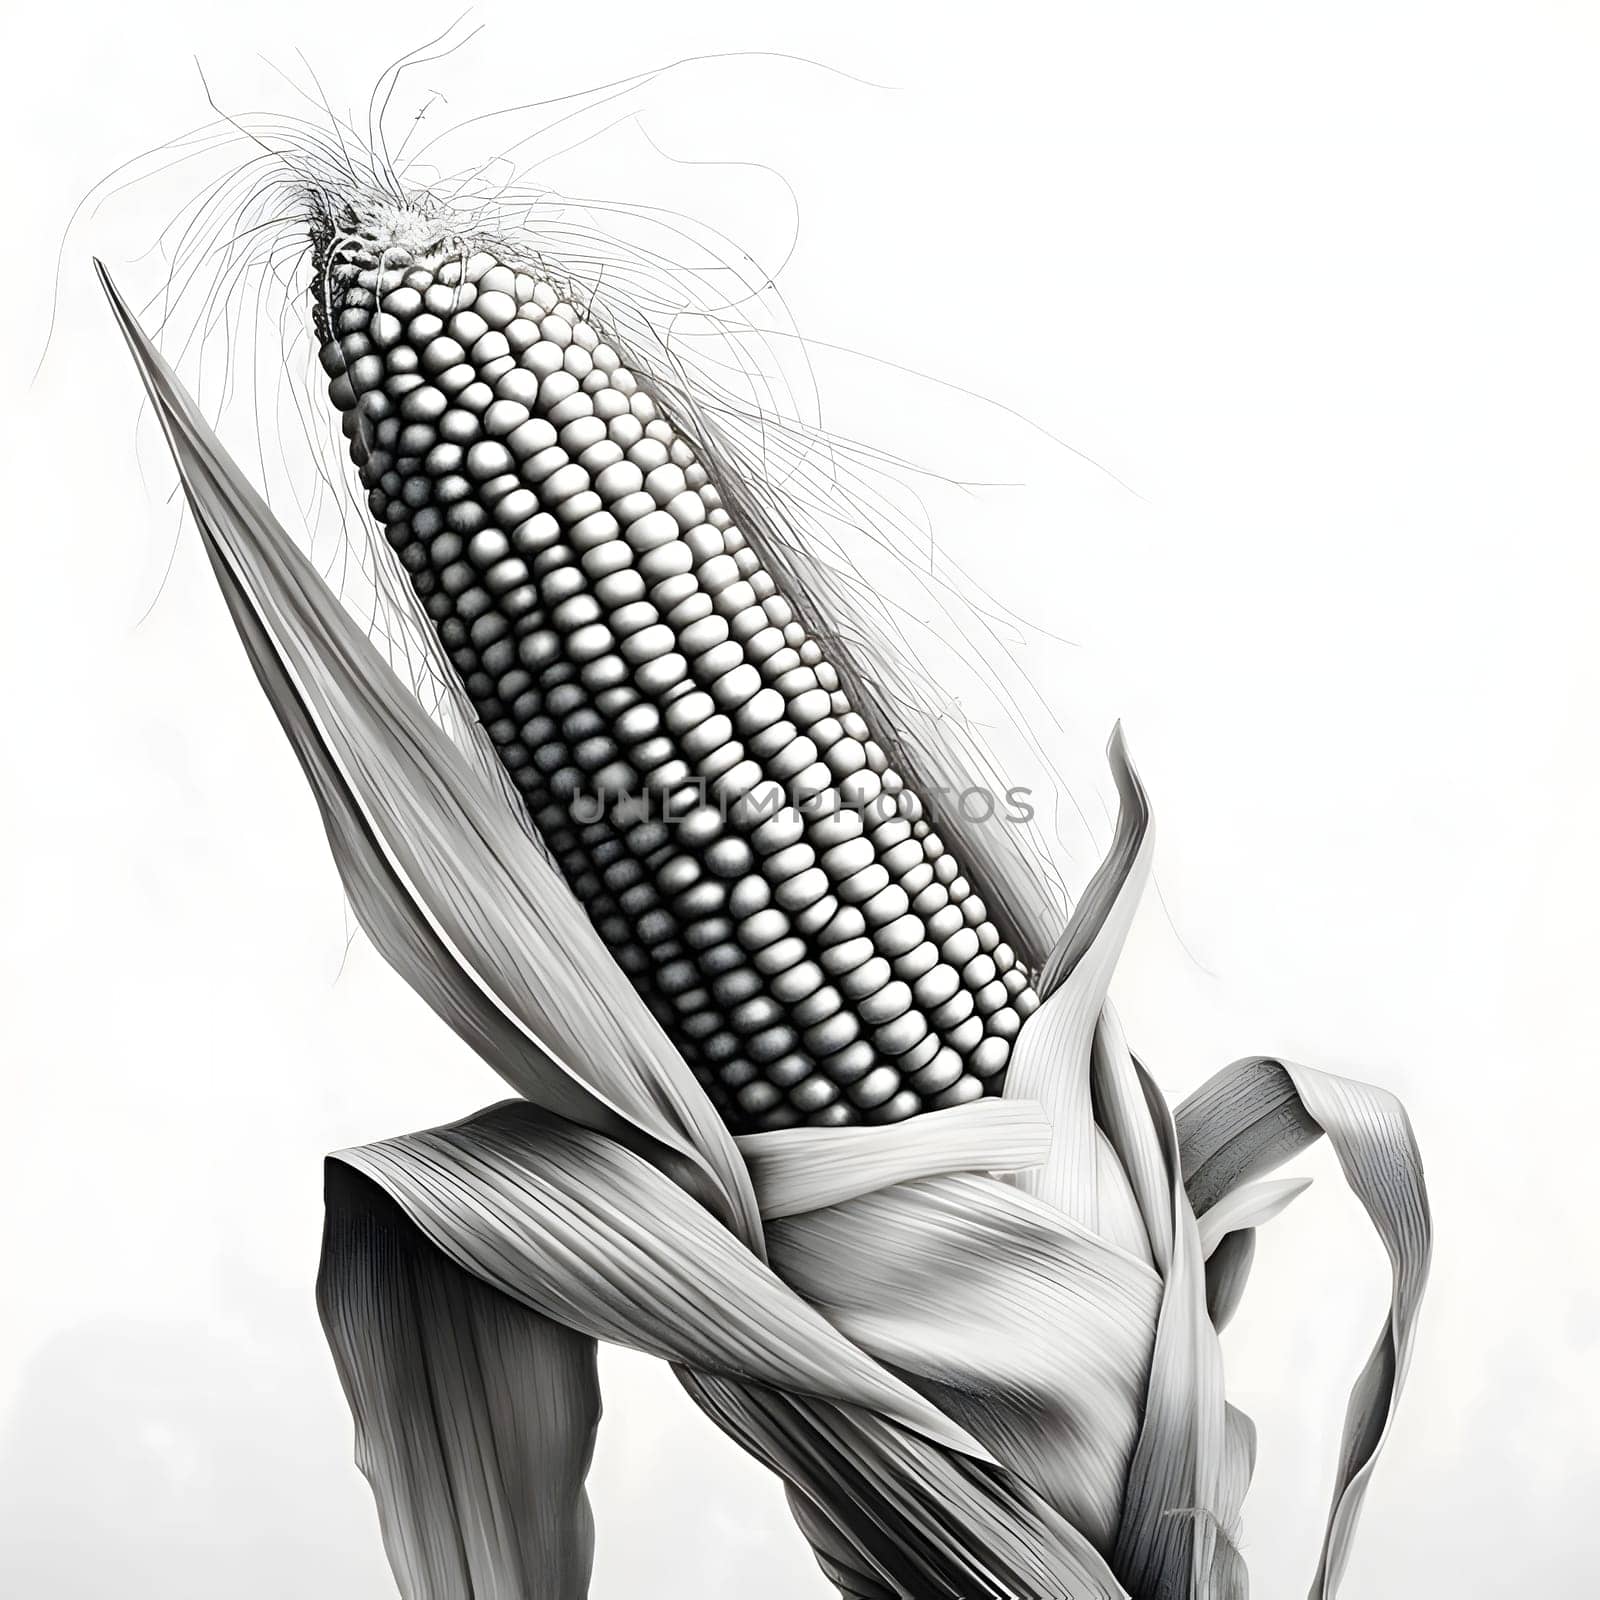 Black and white corn cob on a plant. Corn as a dish of thanksgiving for the harvest. An atmosphere of joy and celebration.